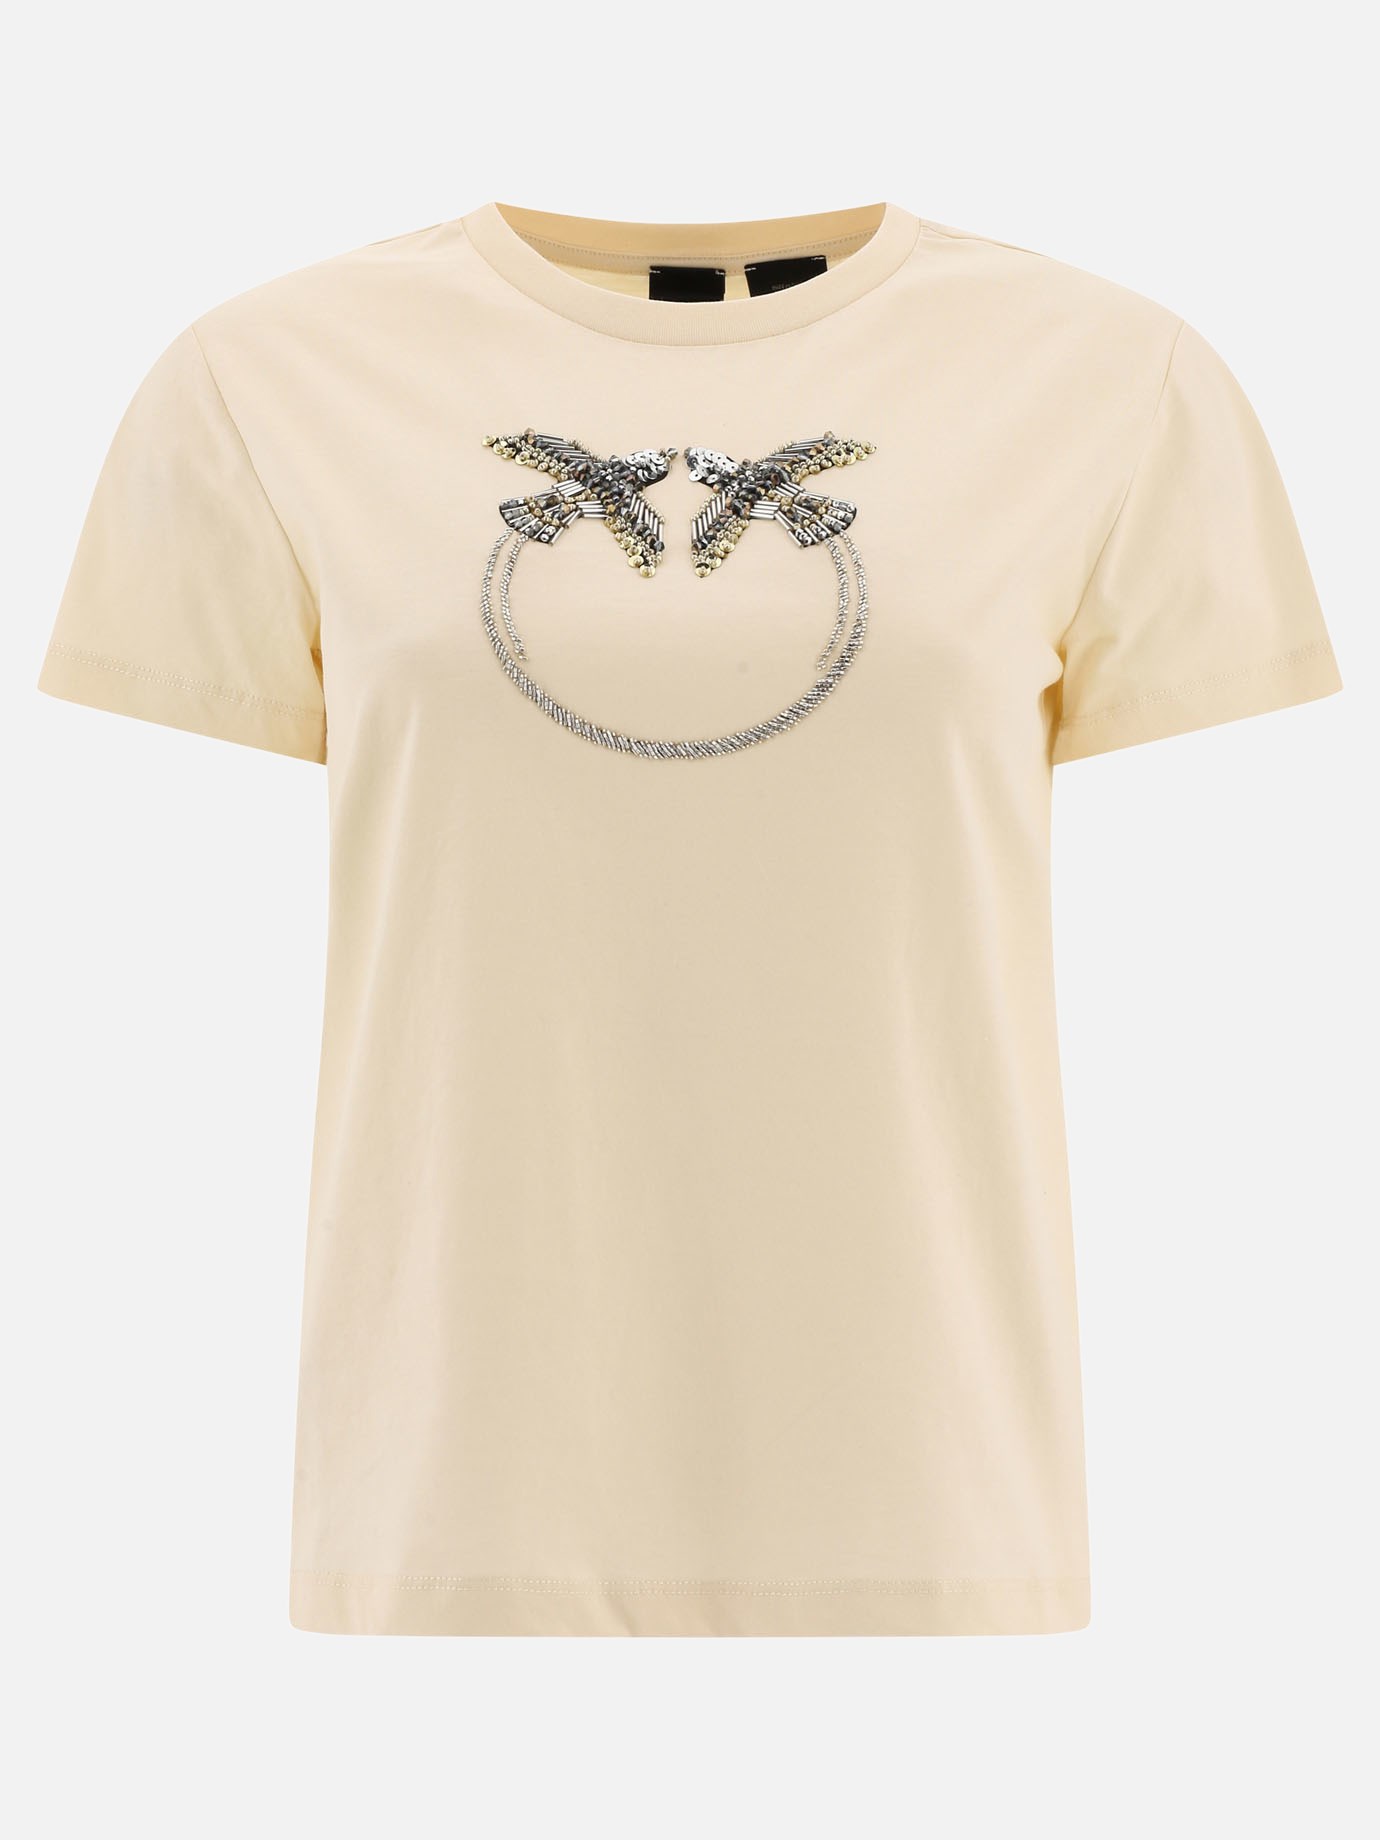  Quentin  t-shirt by Pinko